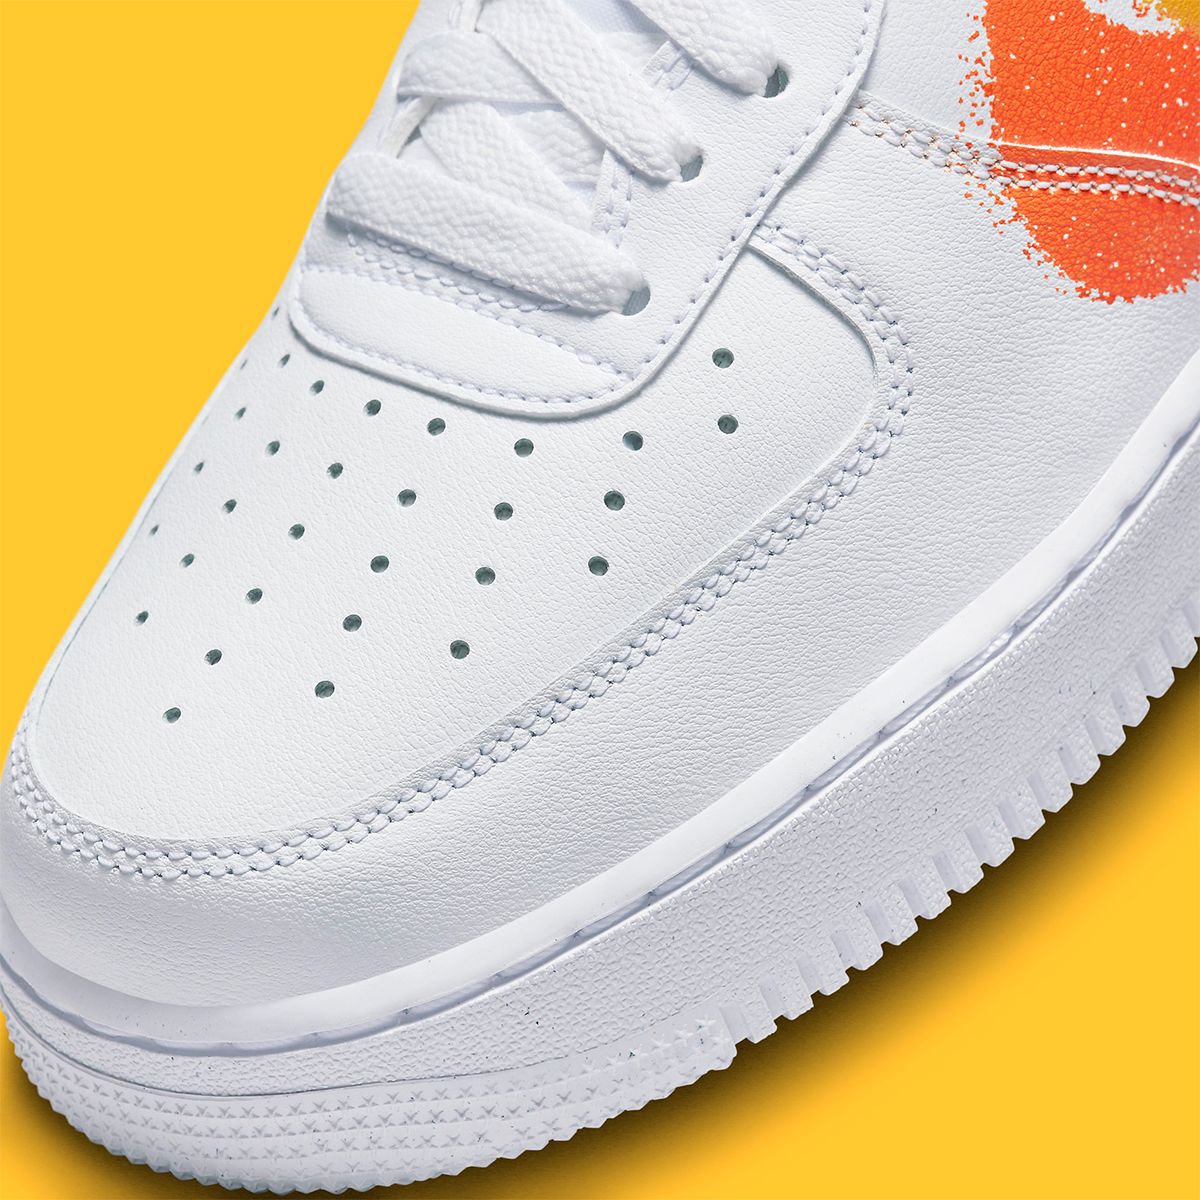 Nike Tags The Air Force 1 Low With Spray Paint Swooshes